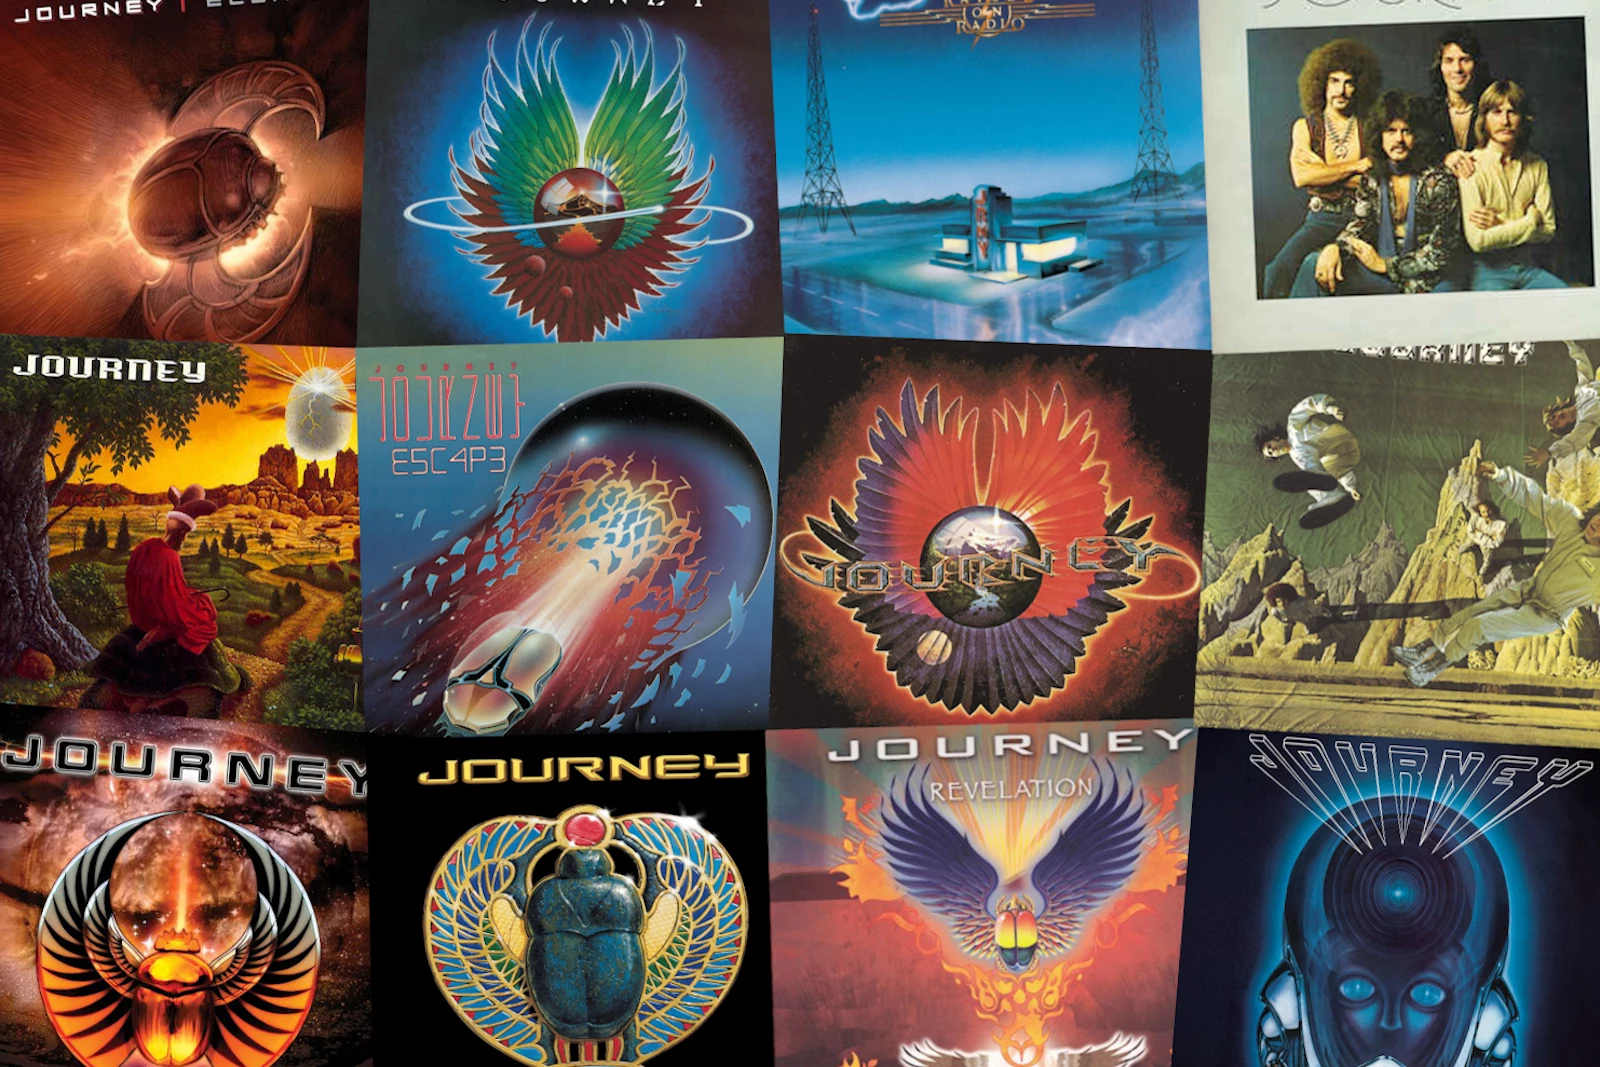 journey album covers beetle meaning